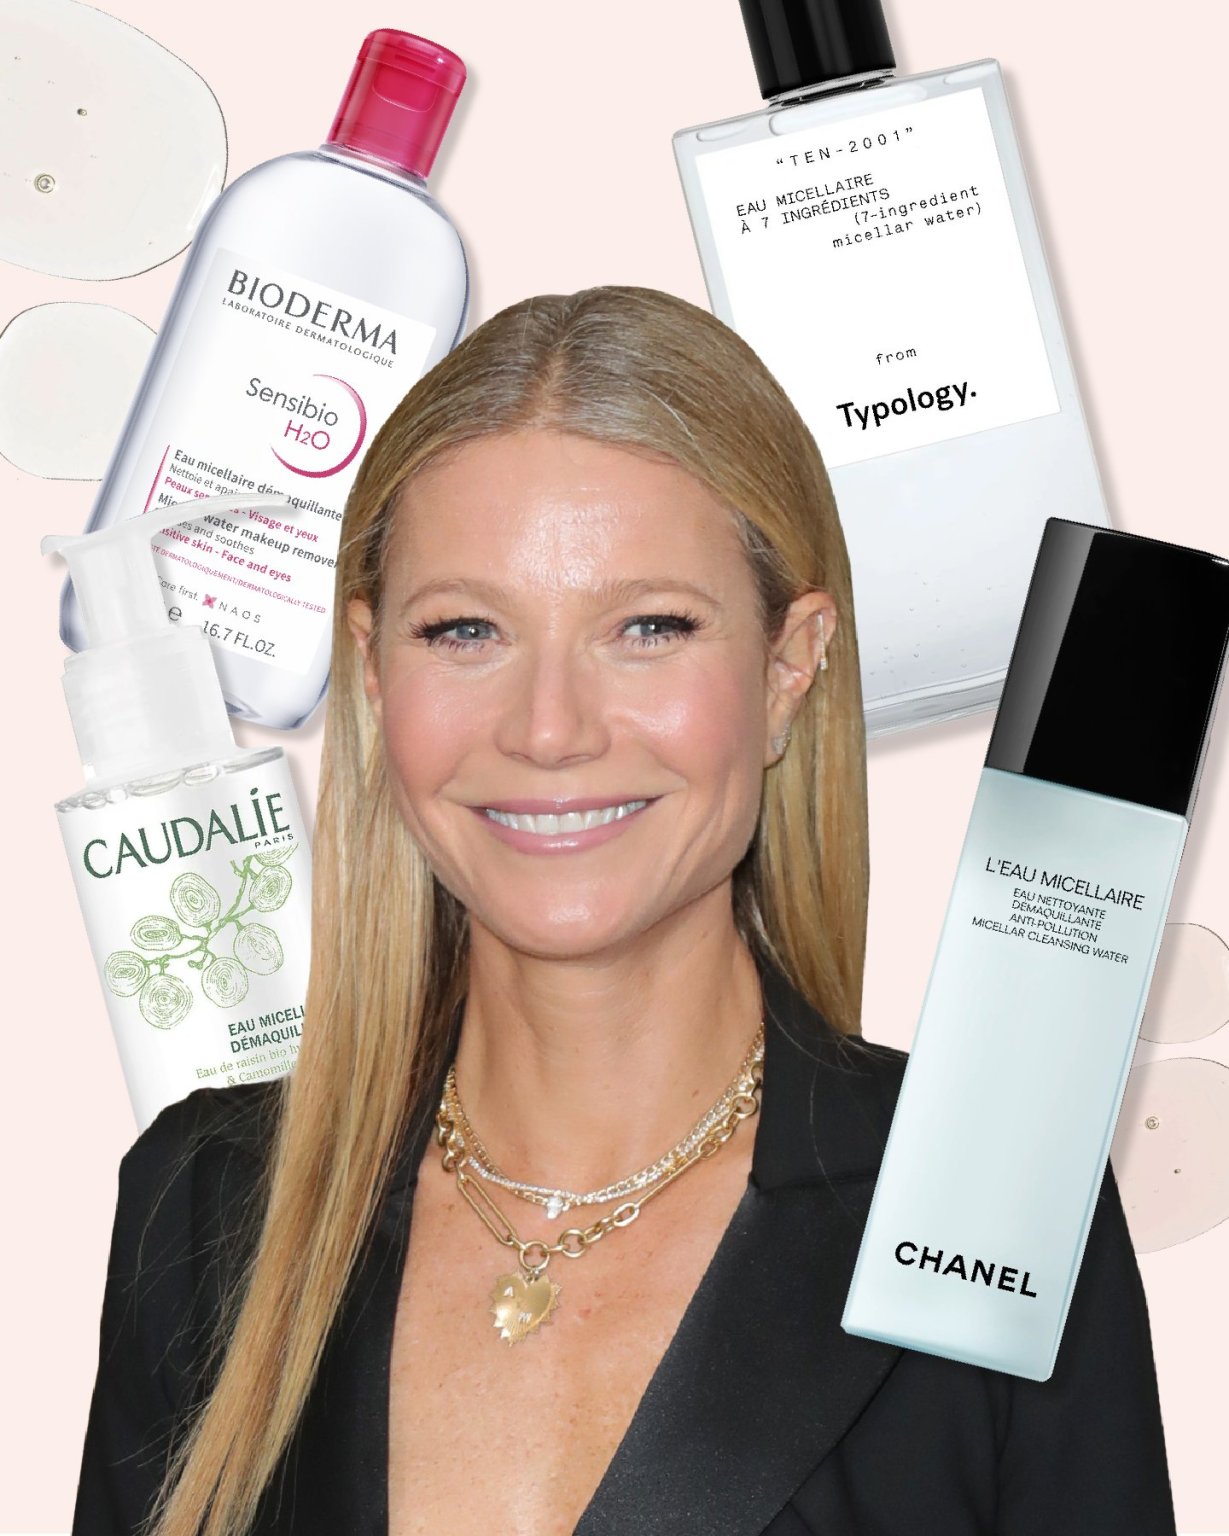 The Best Micellar Water For Removing Makeup and Clarifying Skin